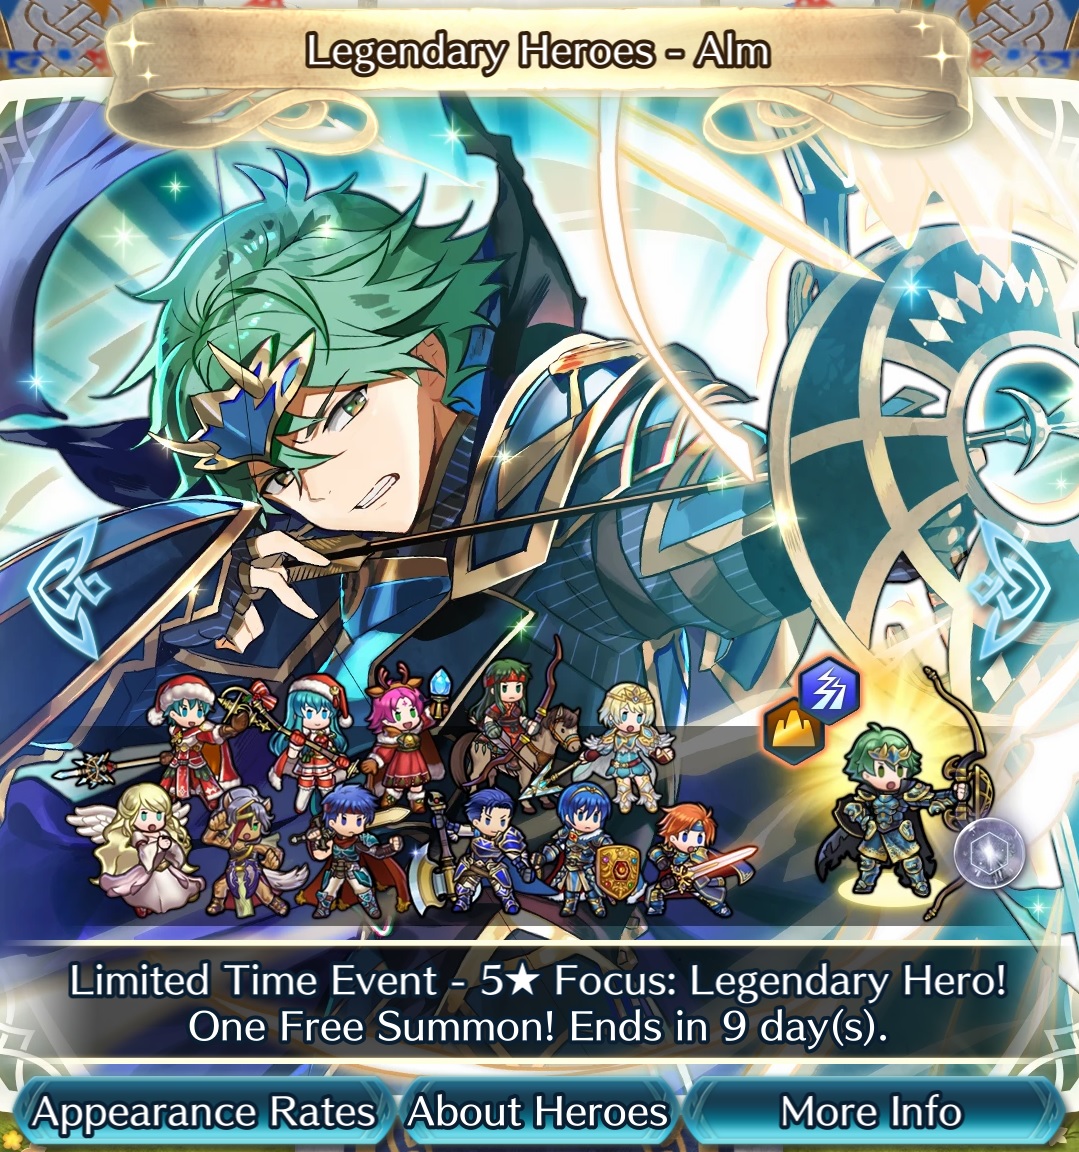 Legendary Heroes Summons and Expected Appearances